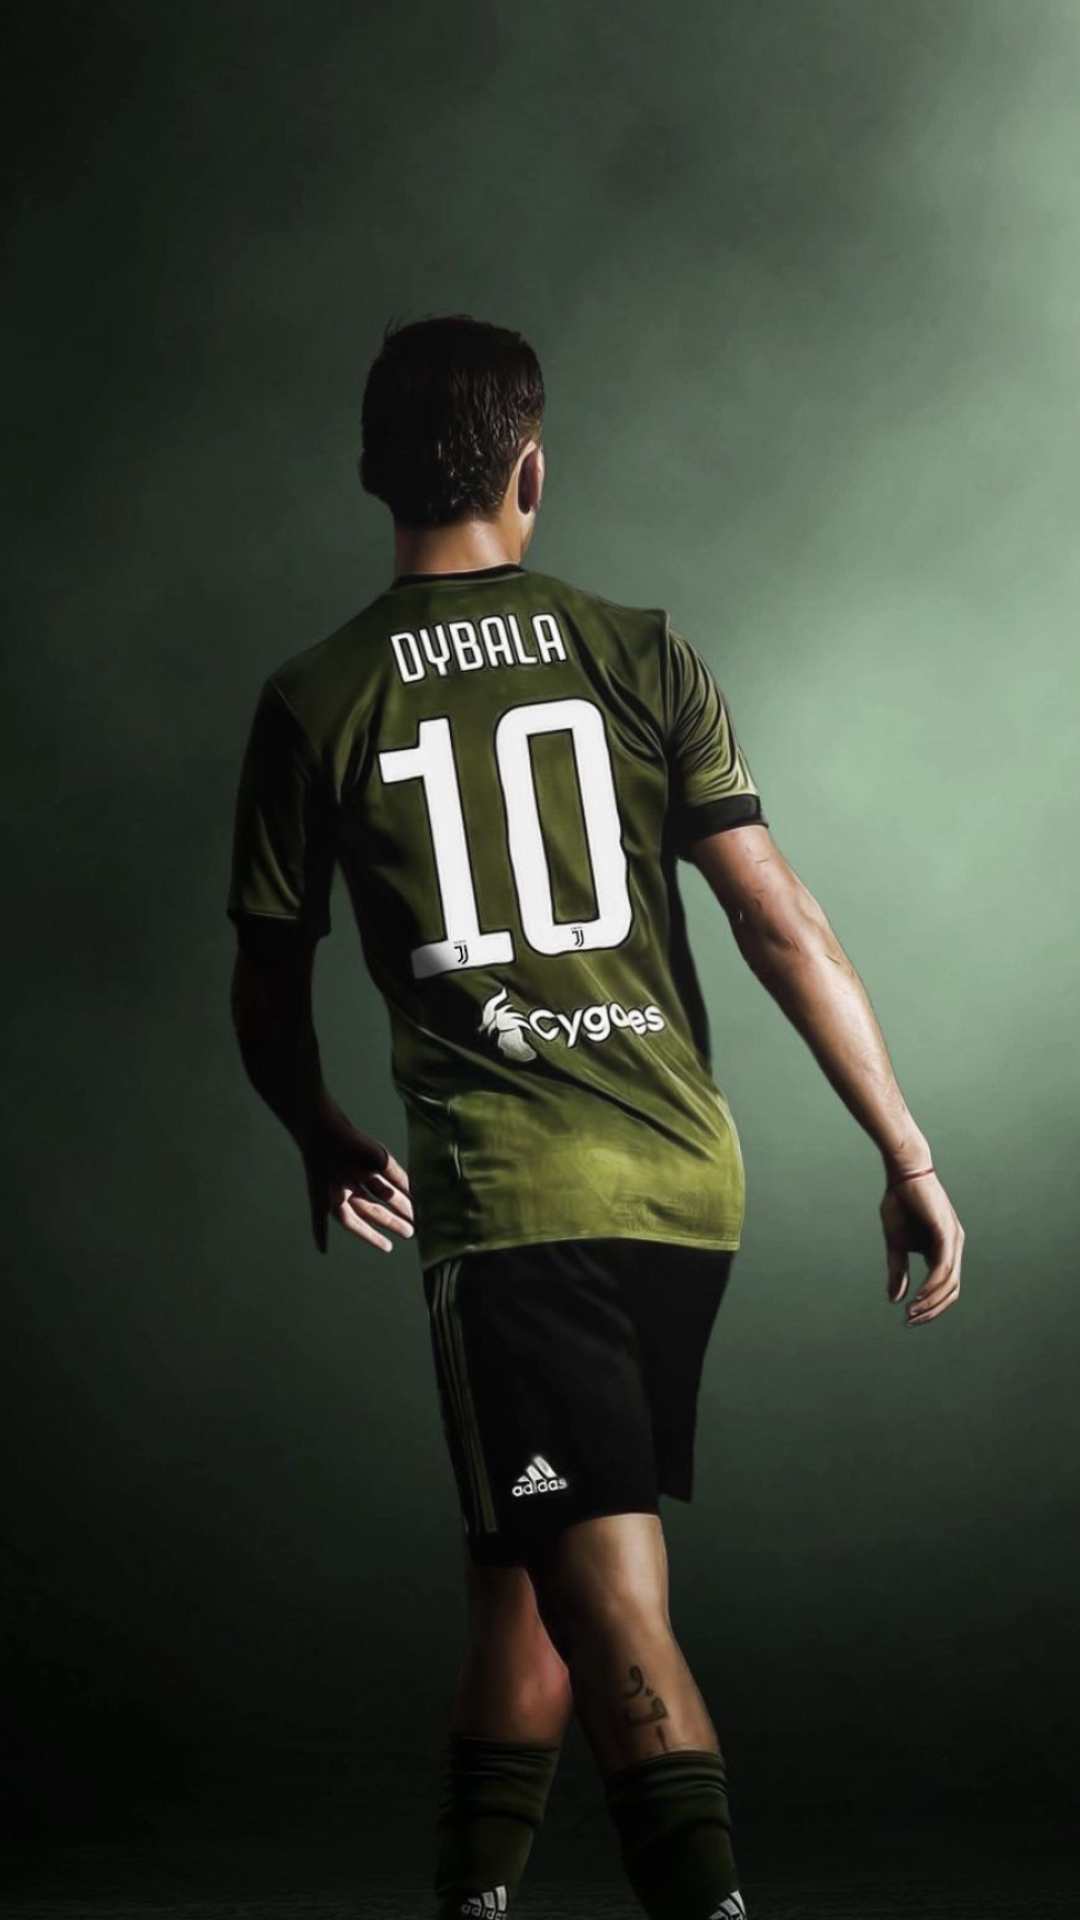 Dybala: AS Roma star, One of football's most versatile and creative sparks. 1080x1920 Full HD Background.